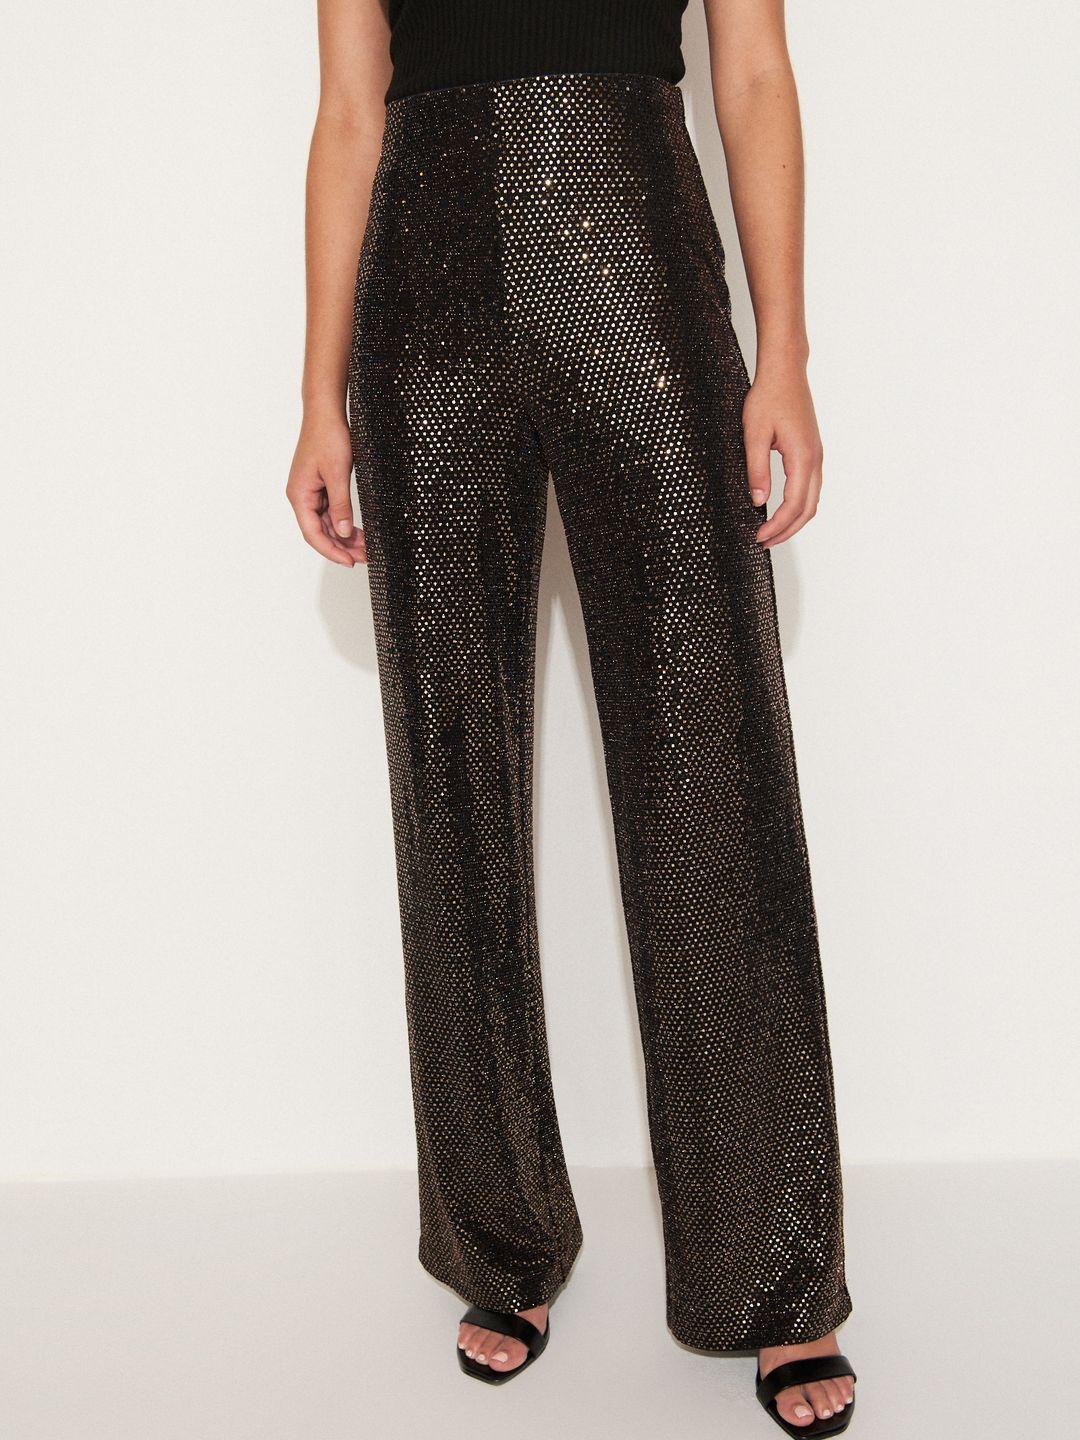 next women embellished trousers